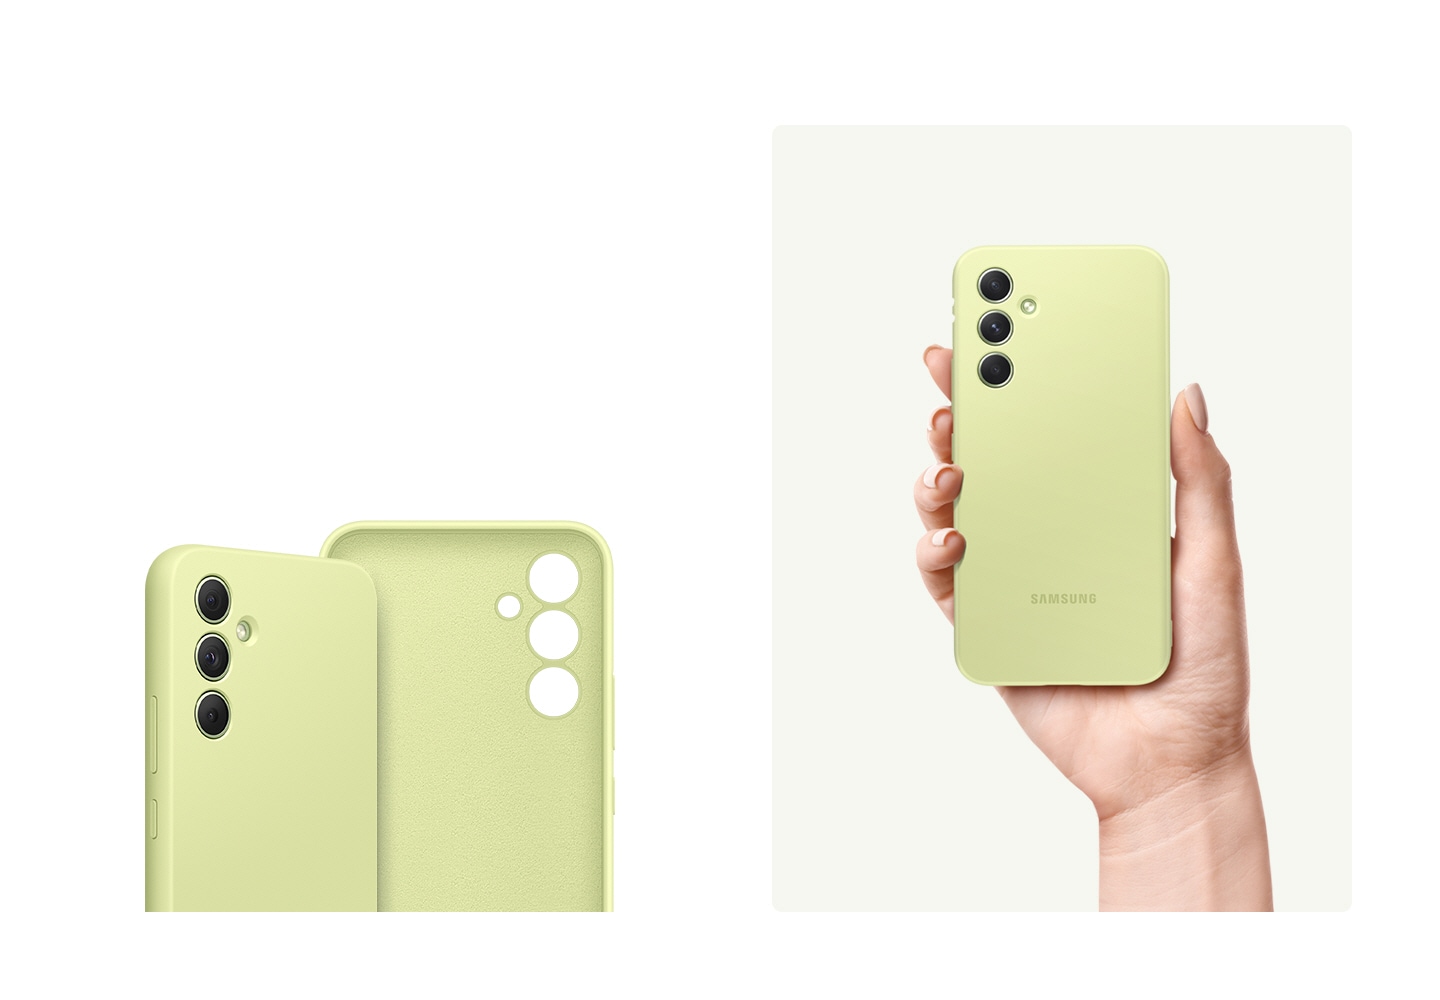 To the left, a Galaxy device wearing a Lime Silicone Case is shown with another empty Lime Silicone Case. To the right, a hand holds up a Galaxy device wearing a Lime Silicone Case.